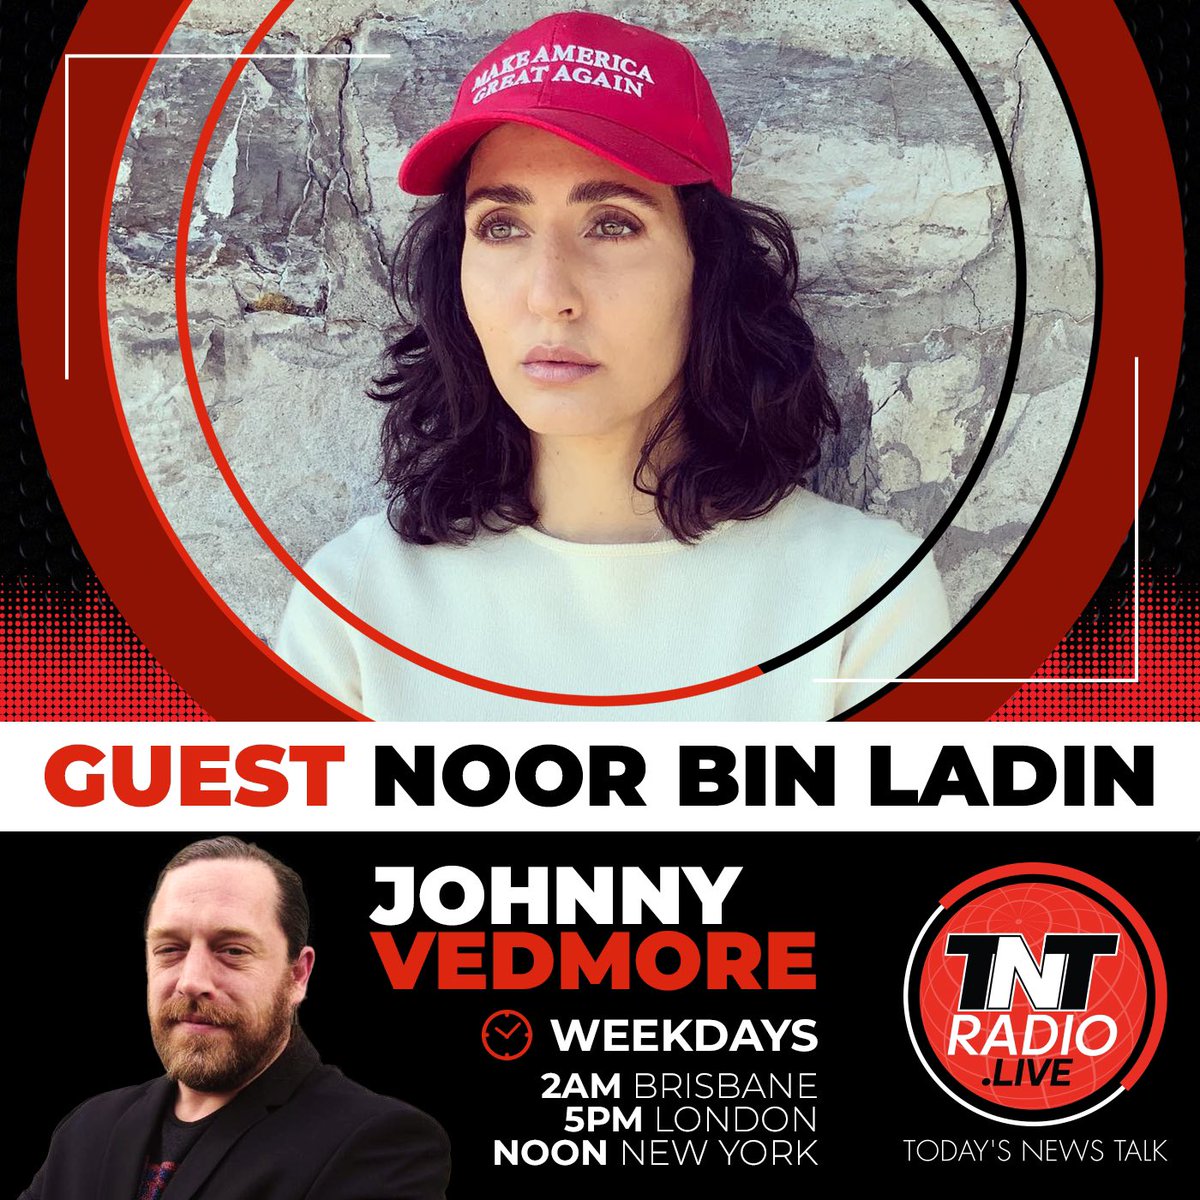 Delighted to have @NoorBinLadin coming on The @JohnnyVedmore Show on @tntradiolive today at 5pm GMT Noon ET! In the past week I spoke to some female powerhouses of the indie media inc. @MelKShow & @CourtenayTurner Best job ever! Join The Conversation at tntradio.live